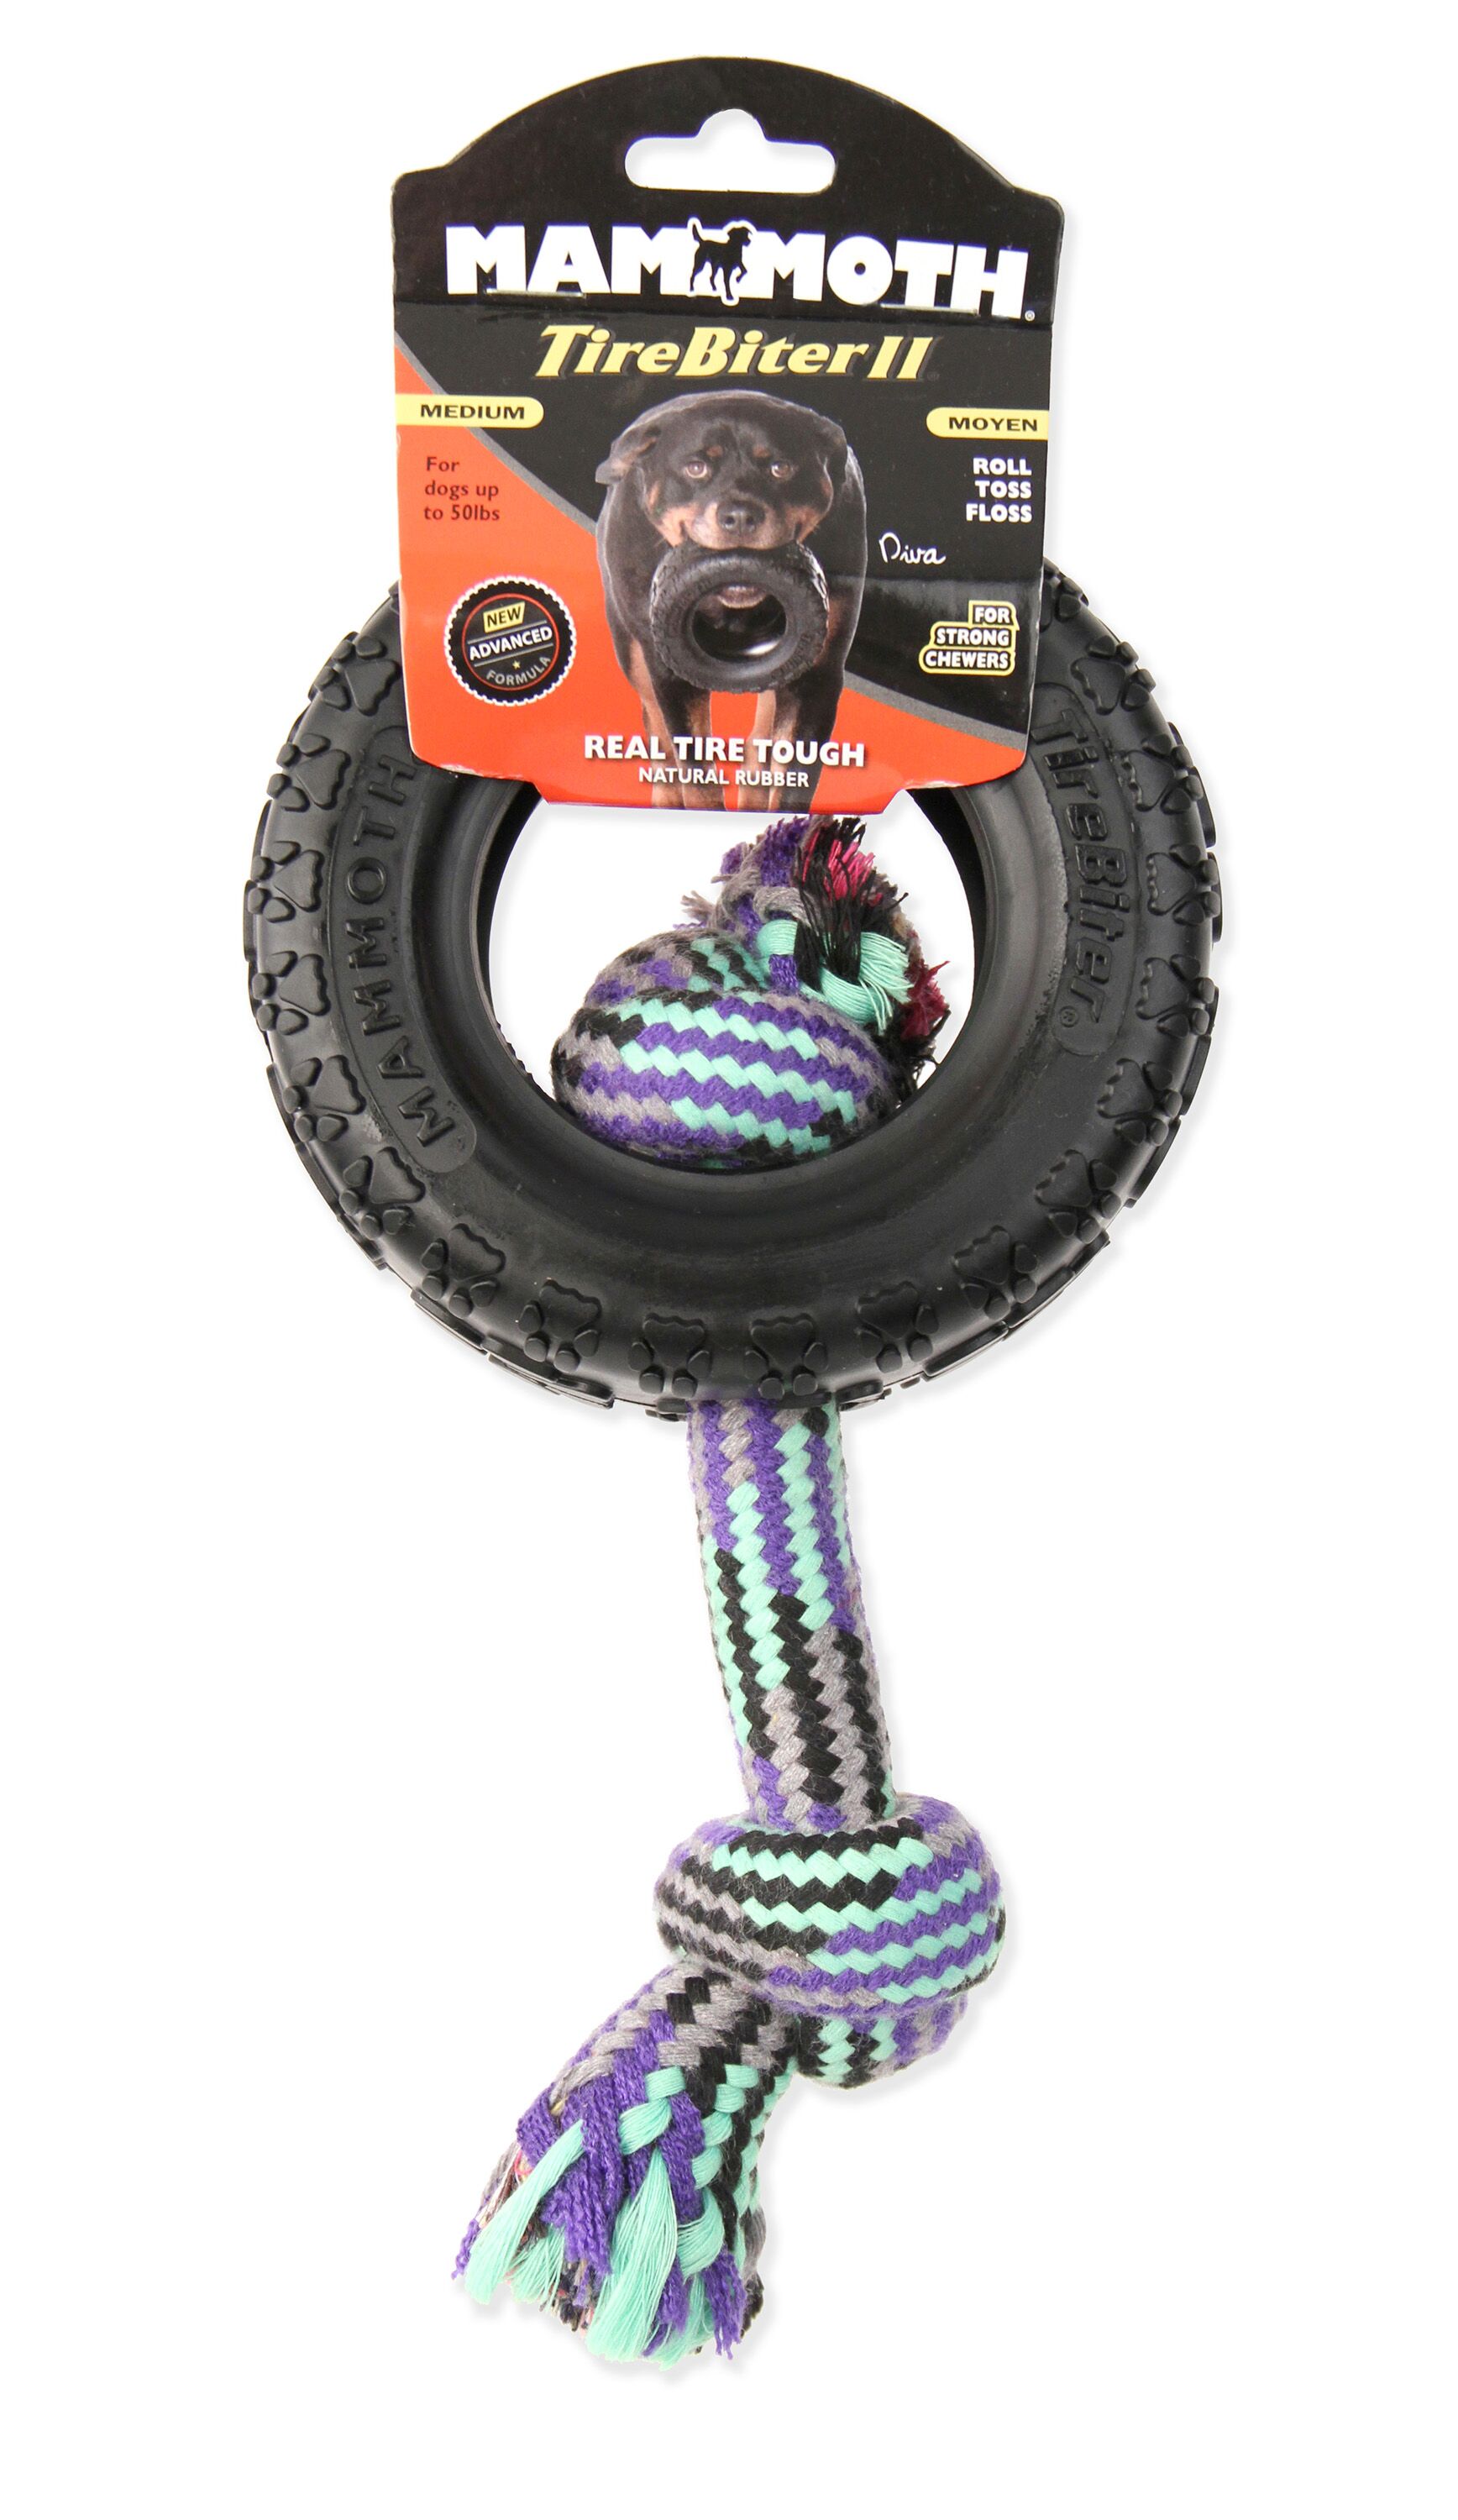 Mammoth Tirebiter II Rubber Tire Dog Toy with Rope, Medium, 5" - $4.66 at Walmart